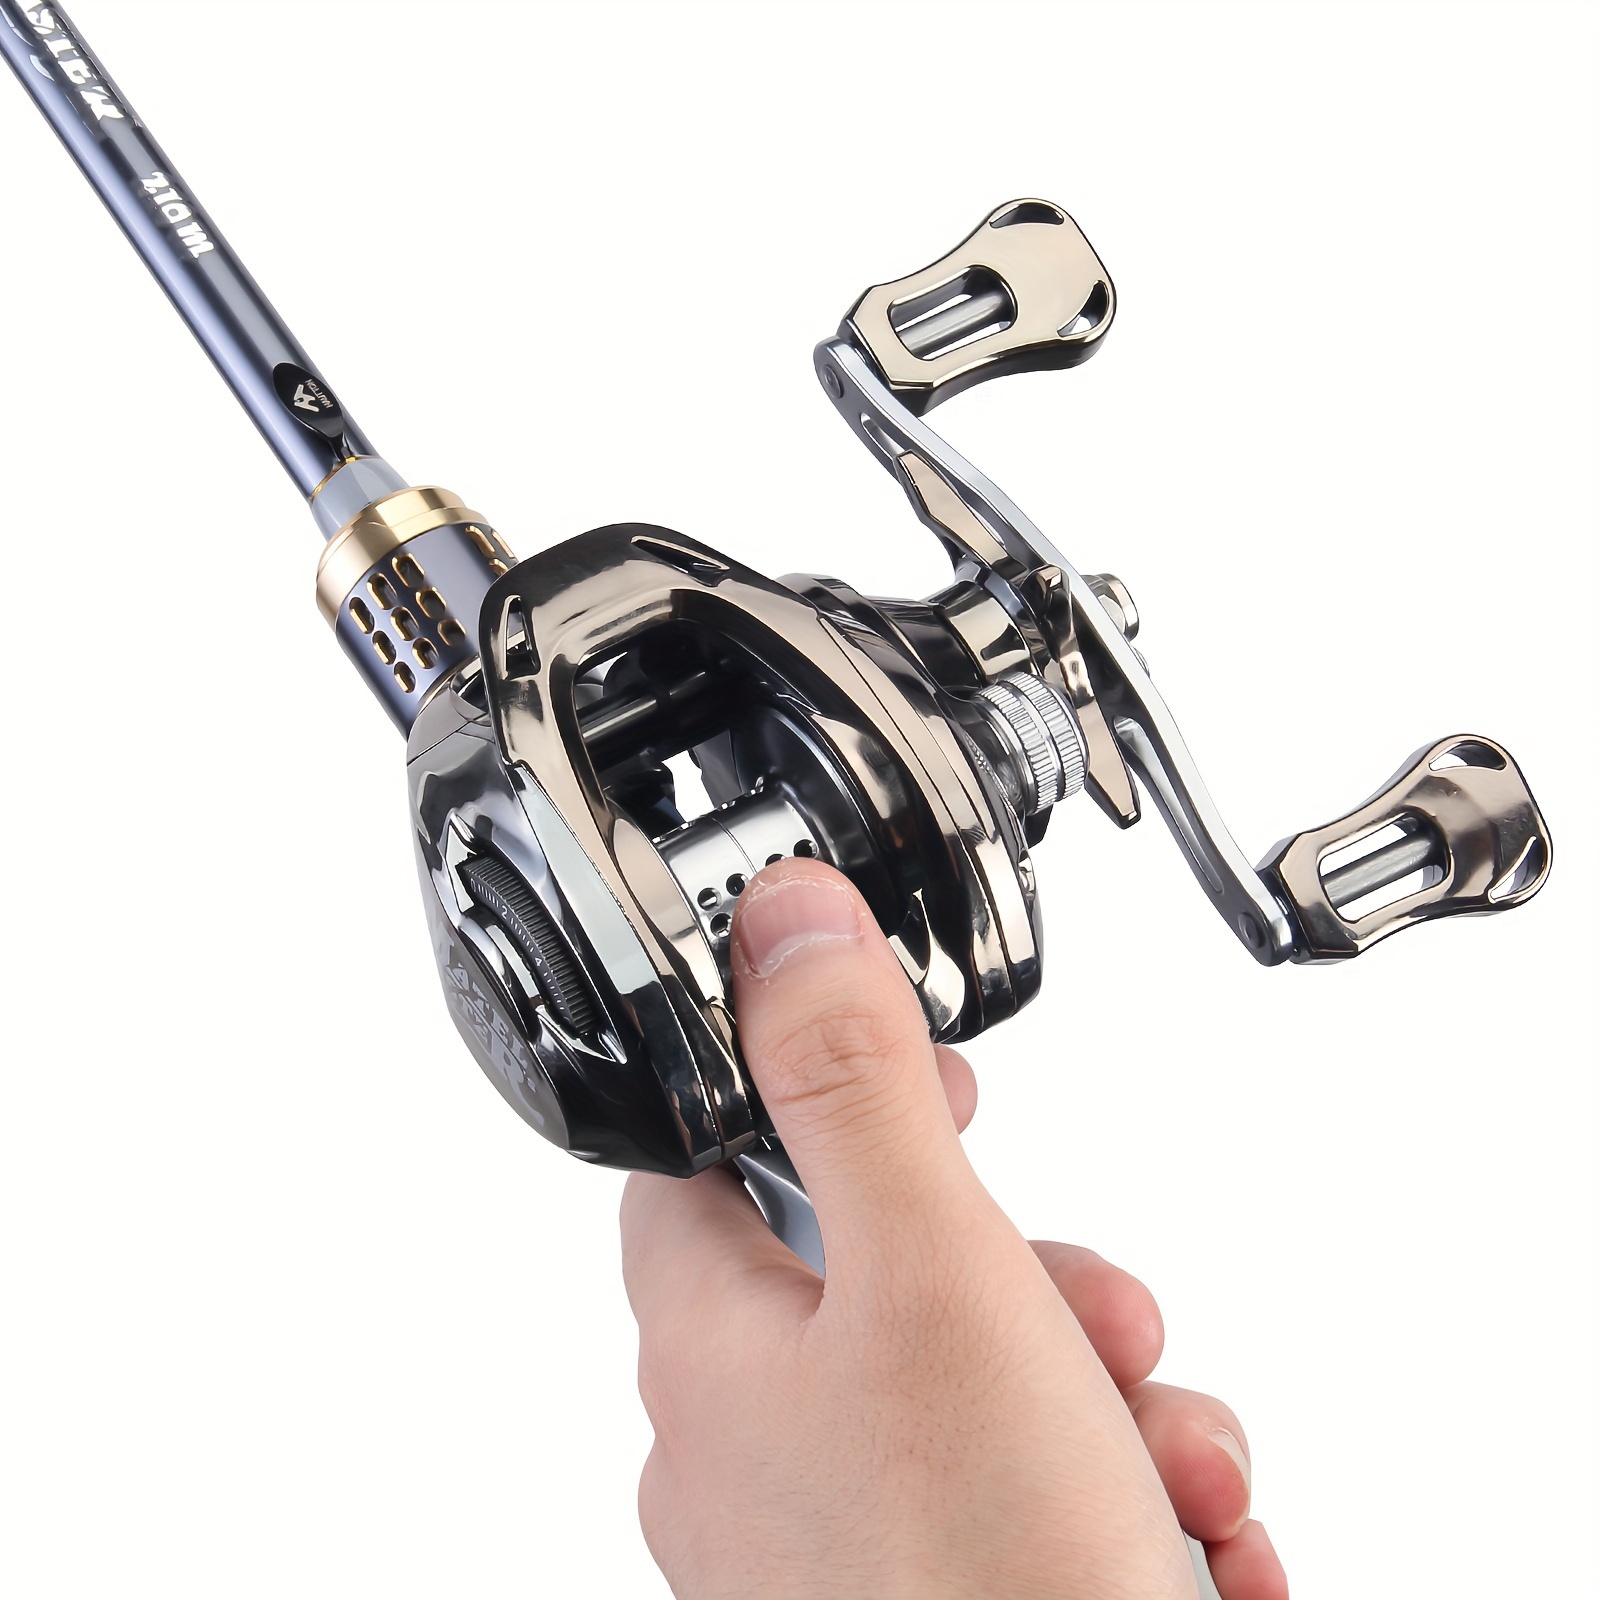 Mccain Fishing Rodhistar Ms-x Carbon Spinning & Casting Rod 1.80m-2.46m -  Superhard, Fast Action